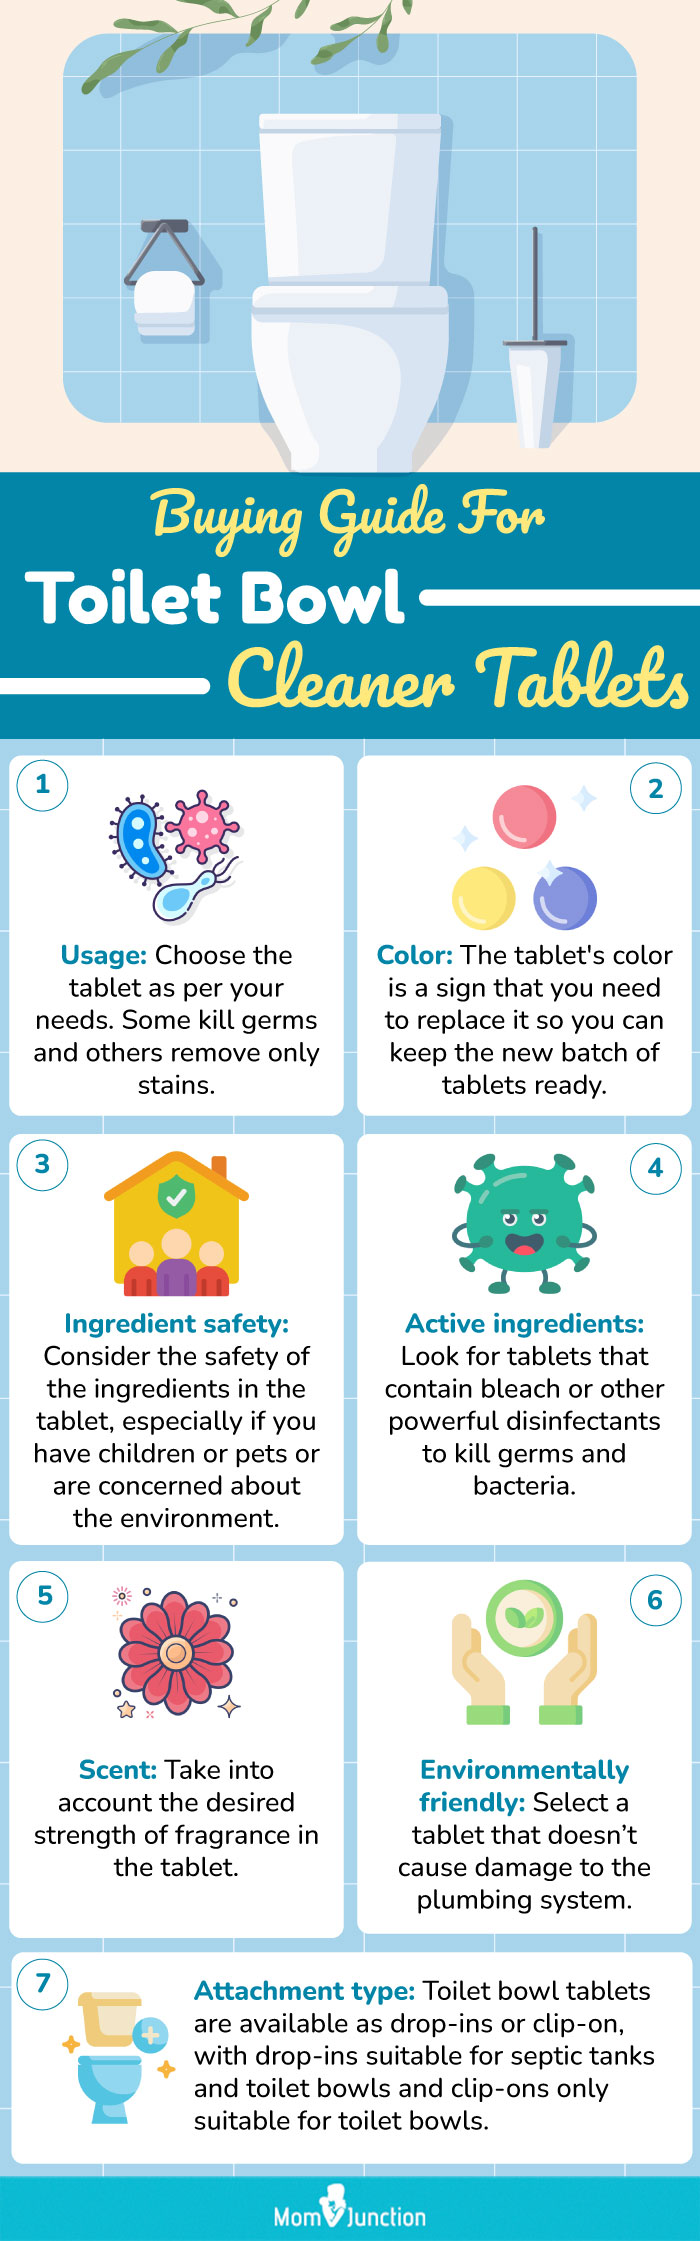 Buying-Guide-For-Toilet-Bowl-Cleaner-Tablets (infographic)